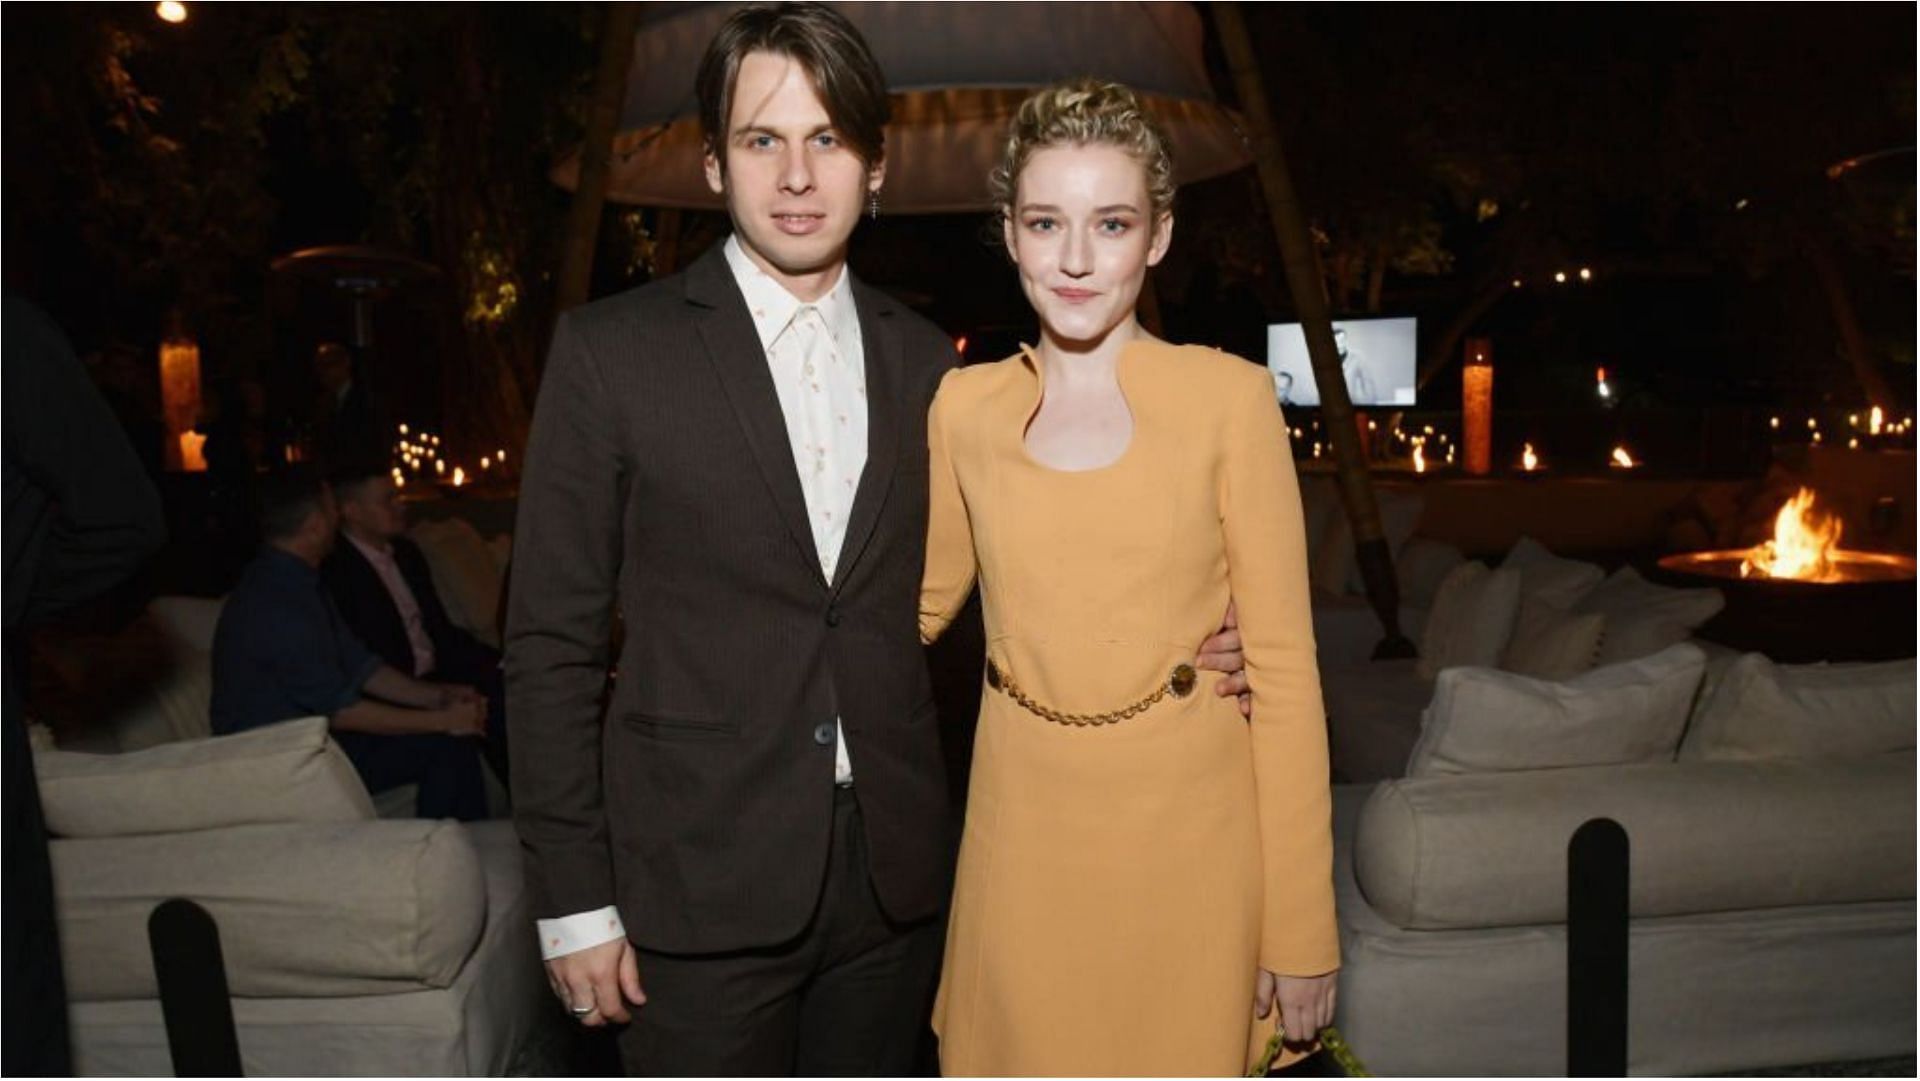 Julia Garner and Mark Foster exchanged vows in 2019 (Image via Emma McIntyre/Getty Images)